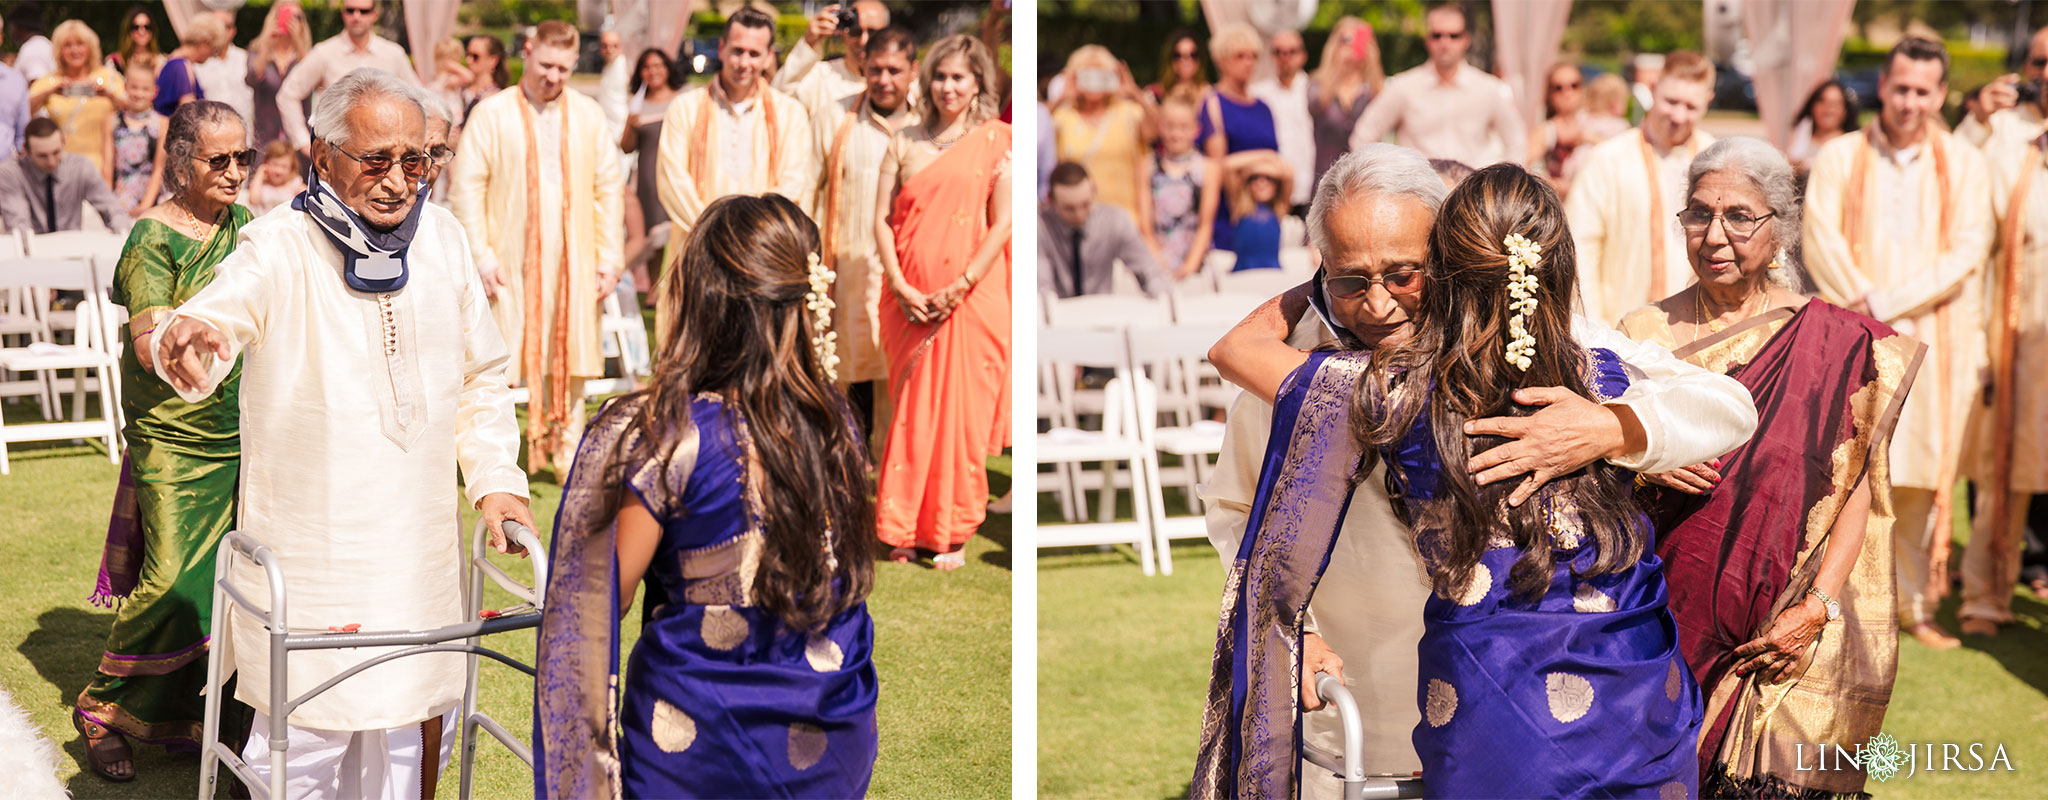 025 sherwood country club indian wedding ceremony photography